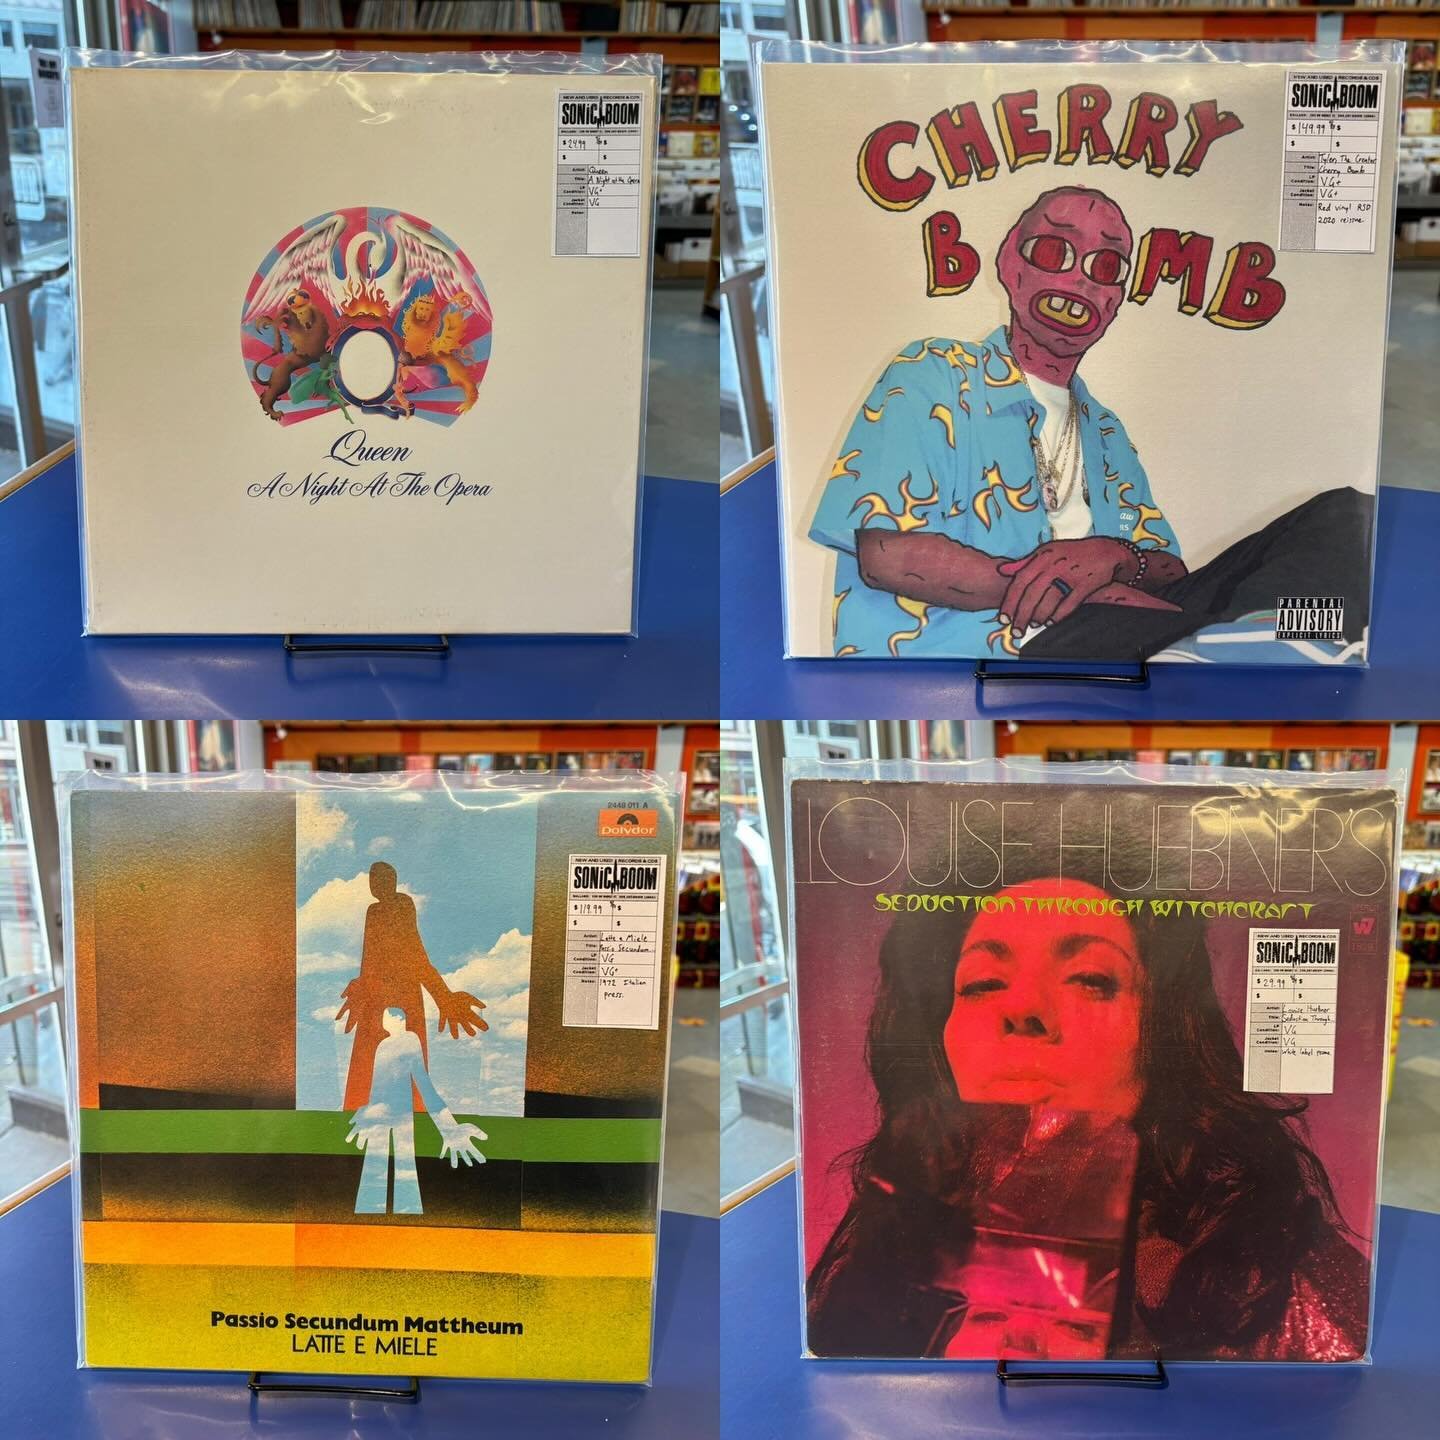 Our RSD isn&rsquo;t just about the new titles&hellip; We also love to bring you the best of the best used records! These records and many, many more go out on Saturday morning right in time for the best day of the year - Record Store Day! As always, 